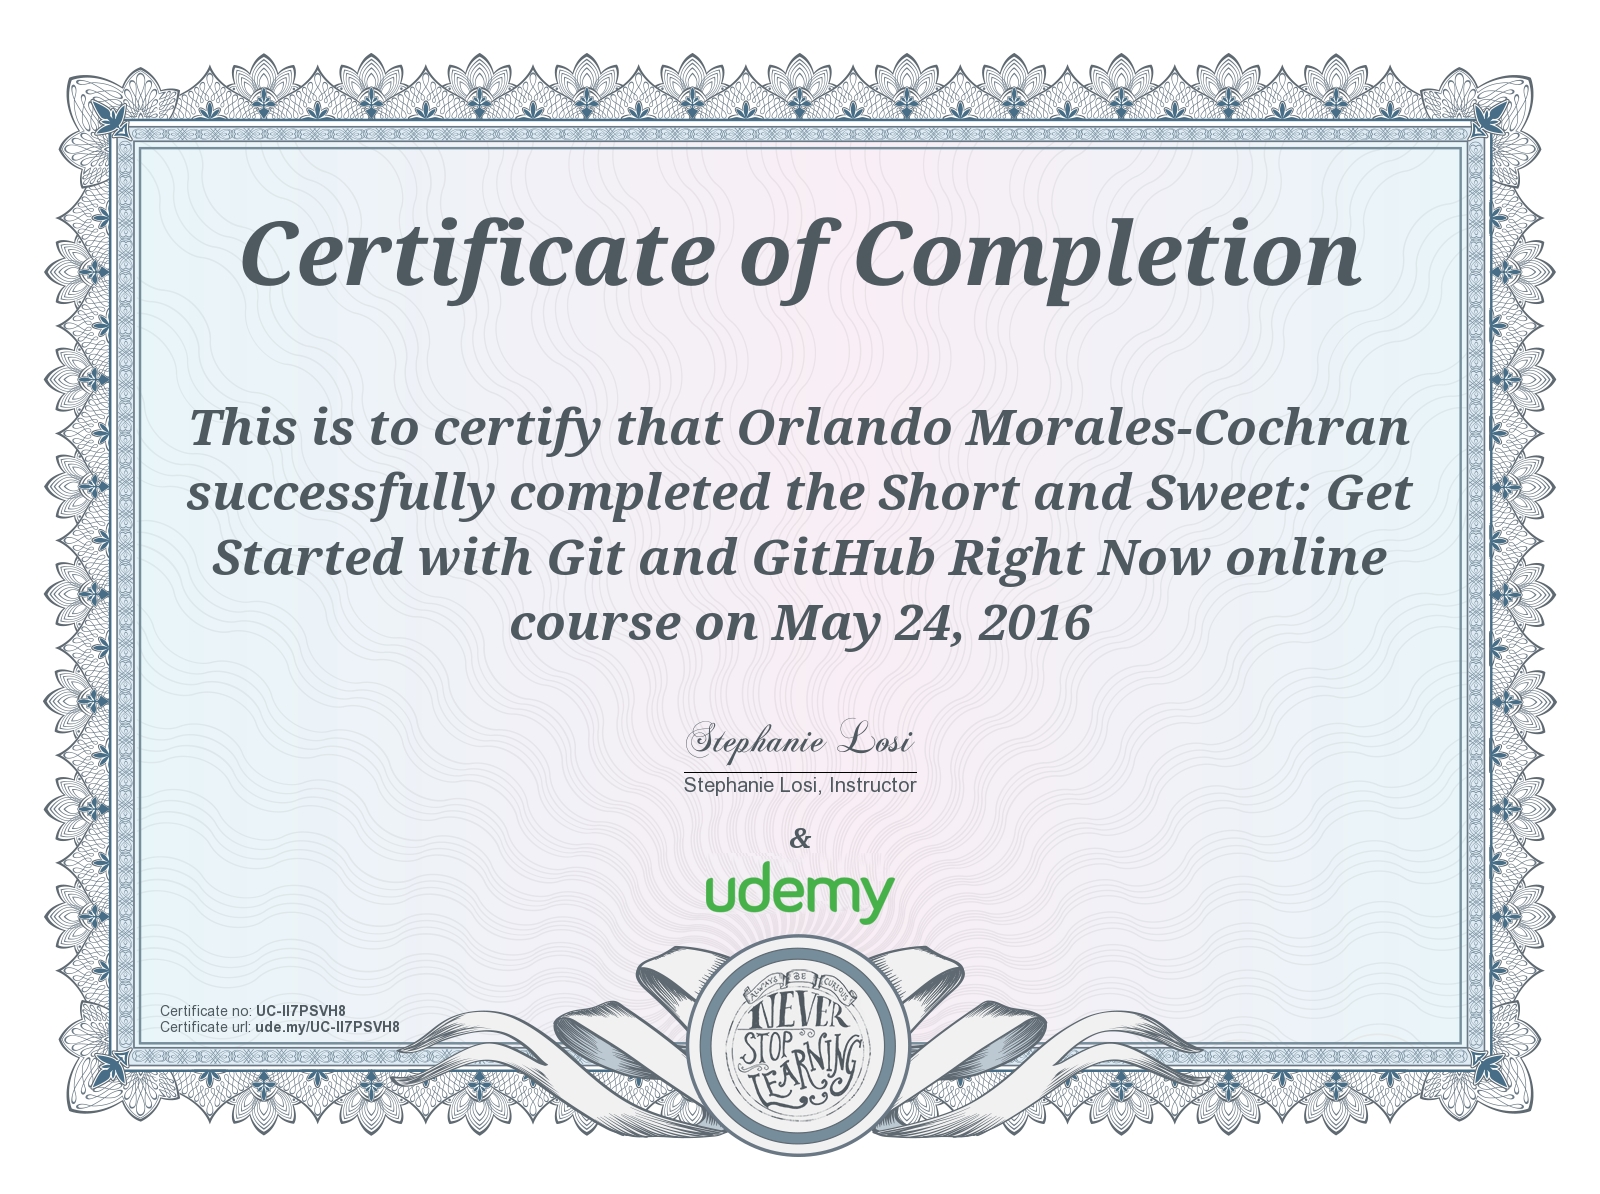 Udemy - Getting Started with Git and Github Certificate of Course Completion